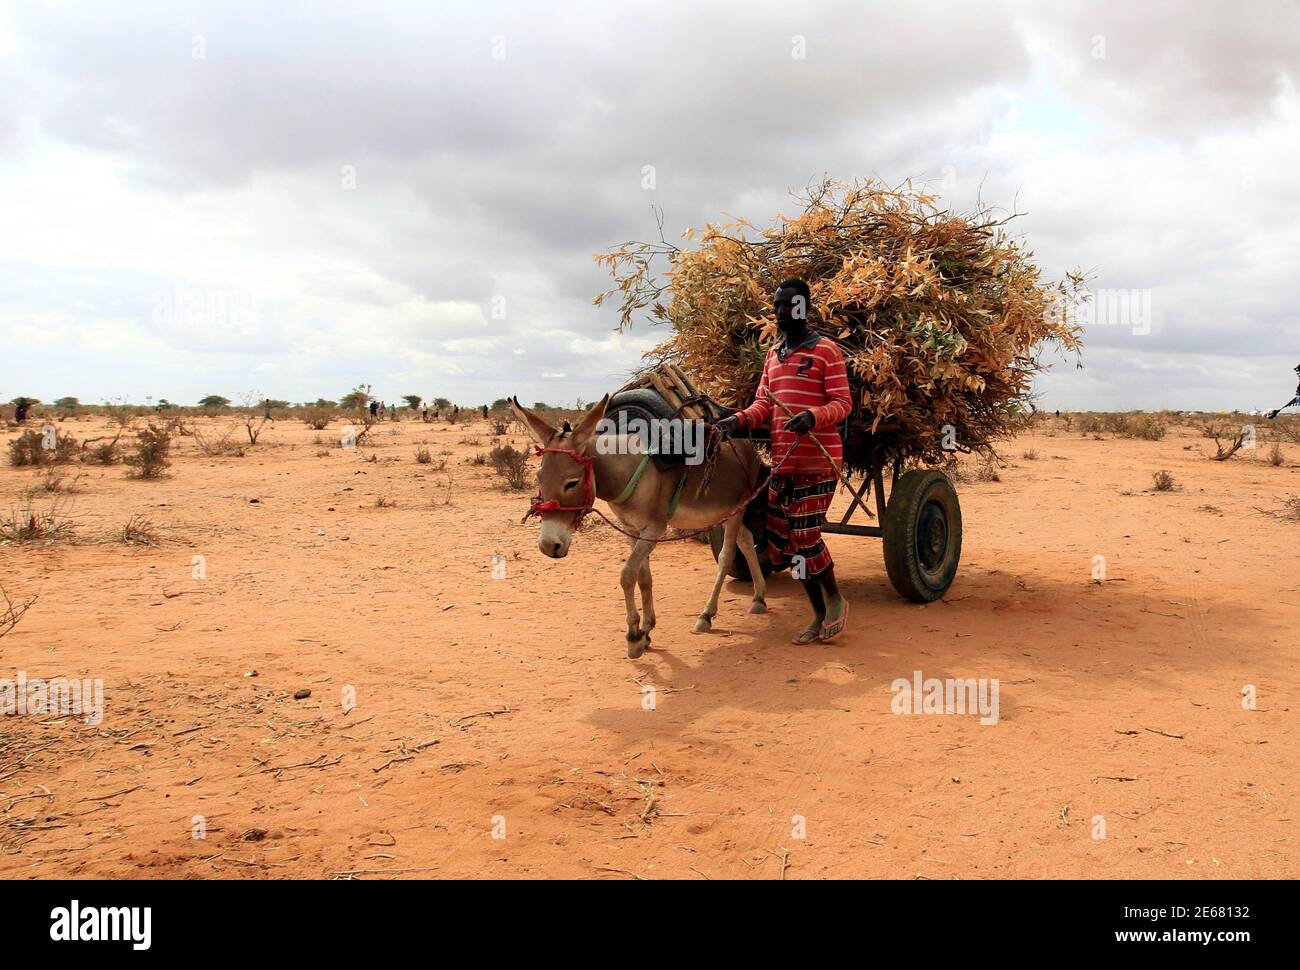 A newly arrived Somali refugee carries firewood using a donkey cart outside the Ifo 2 refugee camp in Dadaab, near the Kenya-Somalia border, July 28, 2011. Thousands of Somalis fleeing drought, famine and war have started moving into a new extension of the world's largest refugee camp in Kenya, which is increasingly concerned about bearing the brunt of the Horn of Africa crisis. REUTERS/Thomas Mukoya (KENYA - Tags: SOCIETY CIVIL UNREST DISASTER ANIMALS) Stock Photo